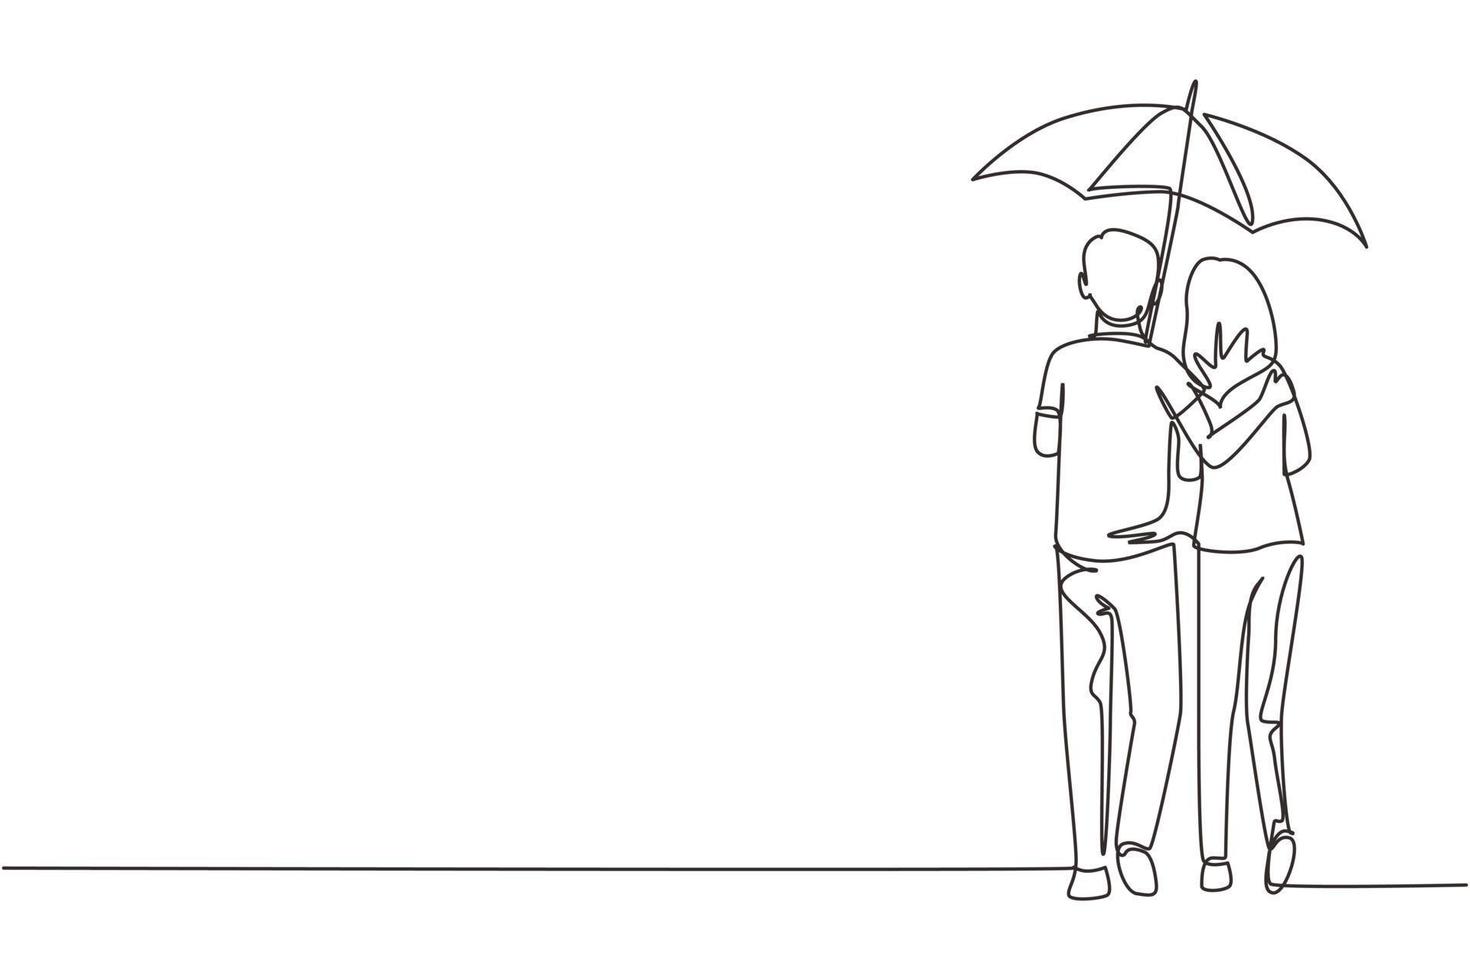 Continuous one line drawing back view lovers couple in rain. Couple in love walking under rain with umbrella. Happy man and woman are walking along city street. Single line draw design vector graphic